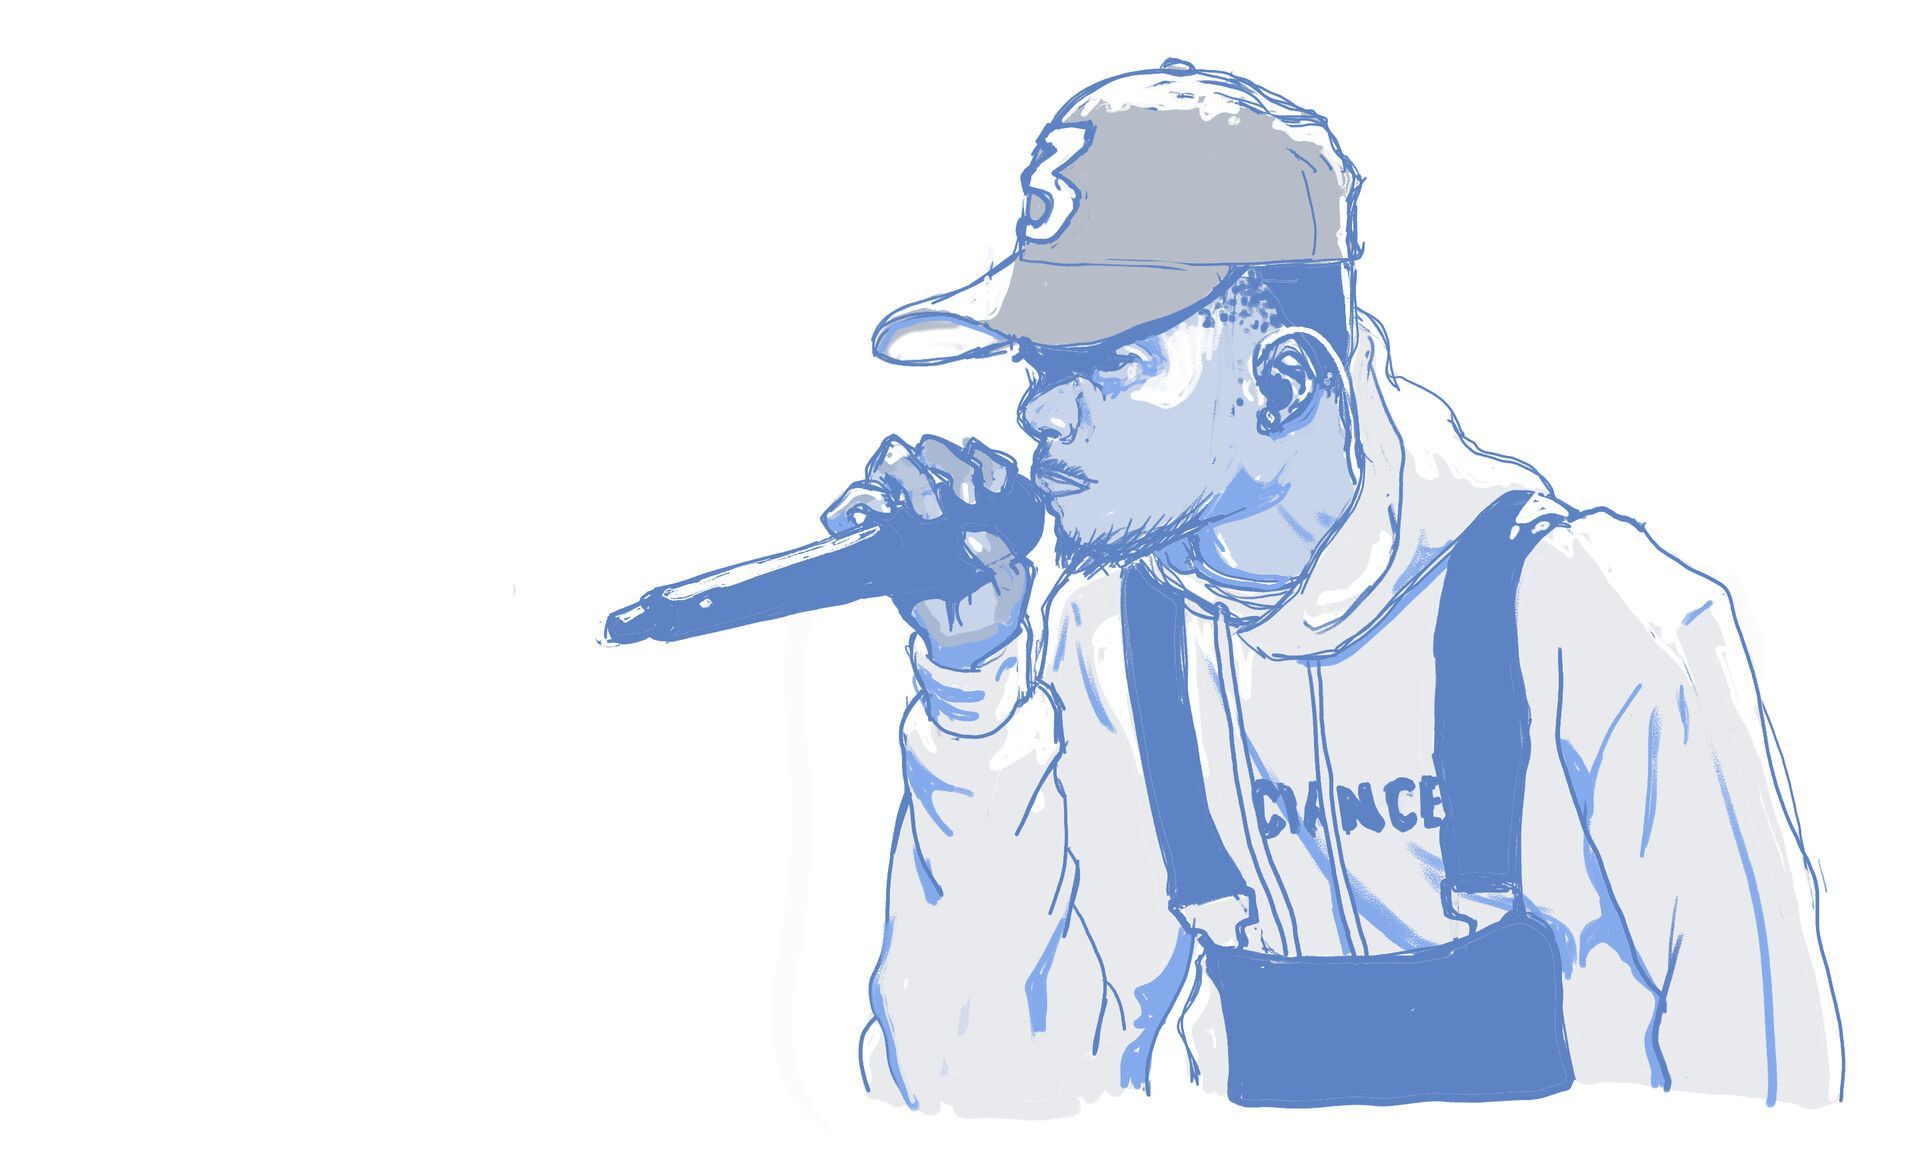 An illustration of Chance the Rapper holding a microphone. - Chance the Rapper